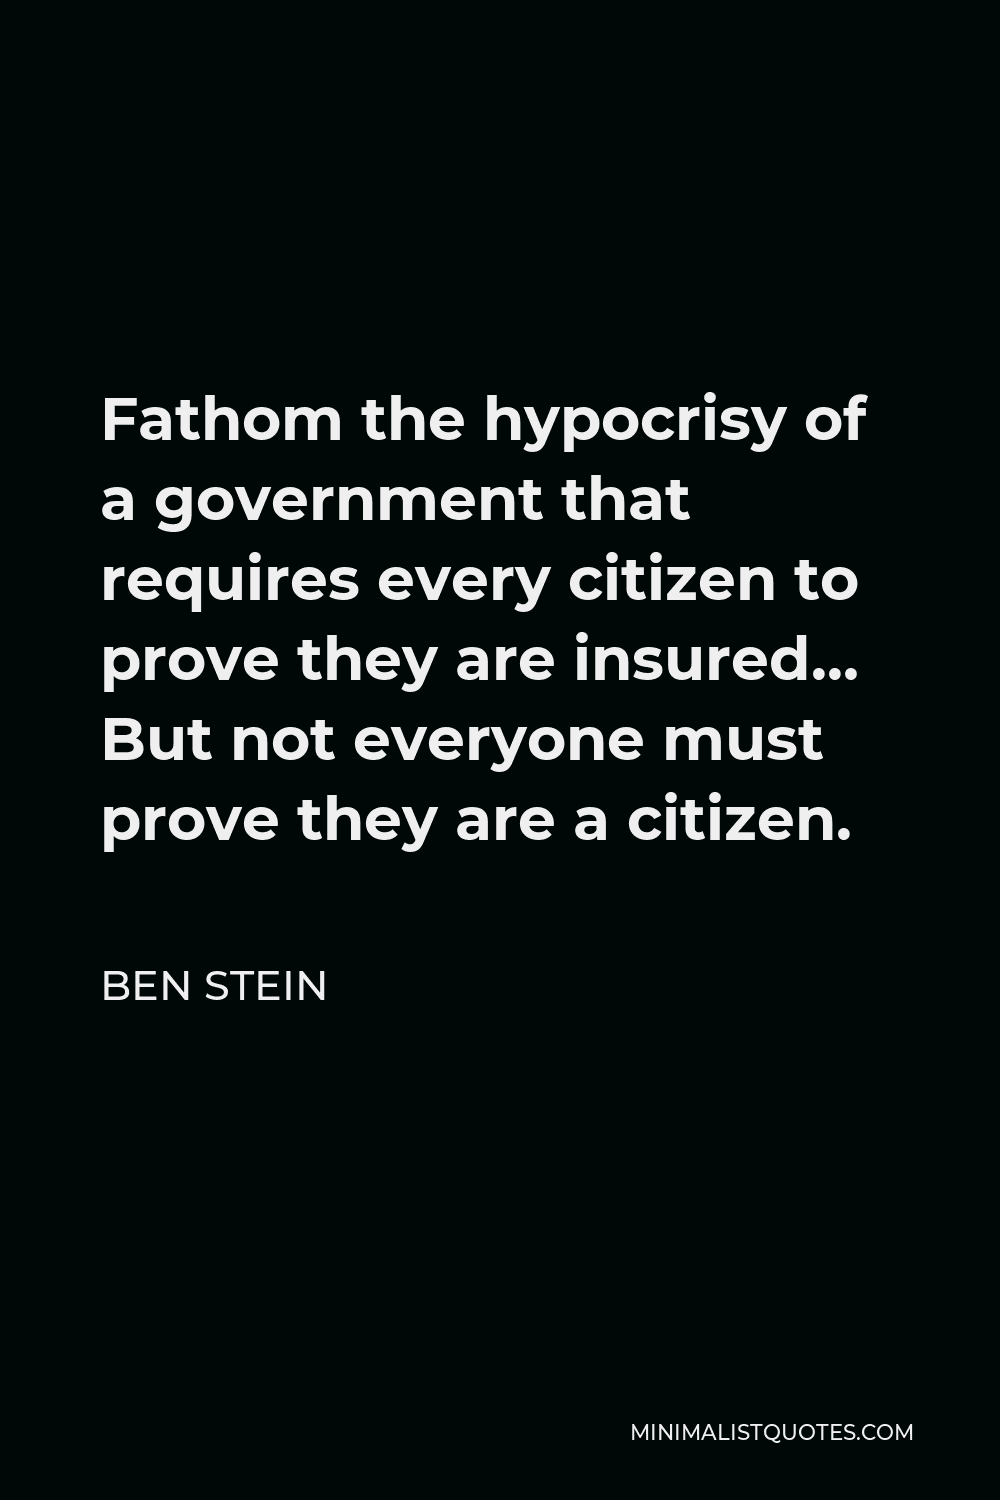 Ben Stein Quote - Fathom the hypocrisy of a government that requires every citizen to prove they are insured… But not everyone must prove they are a citizen.